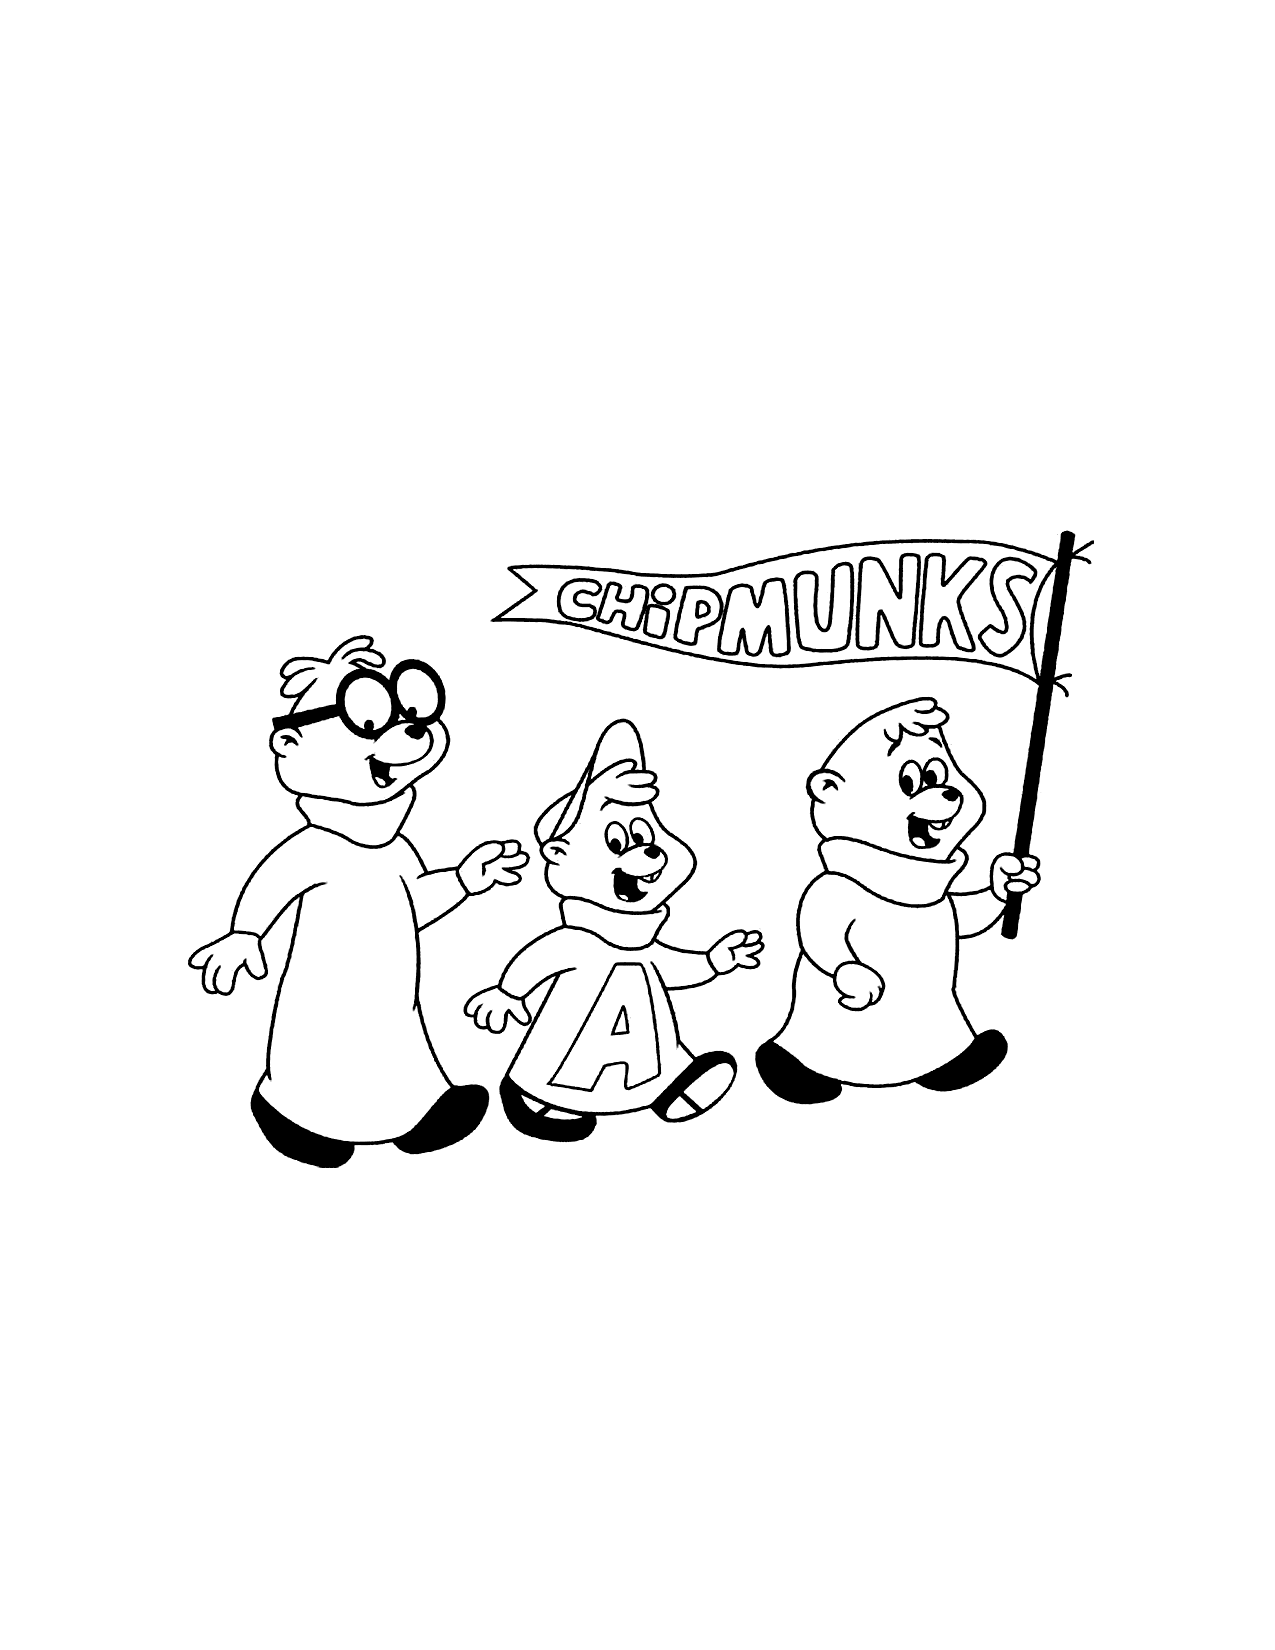 The Chipmunks Coloring Page